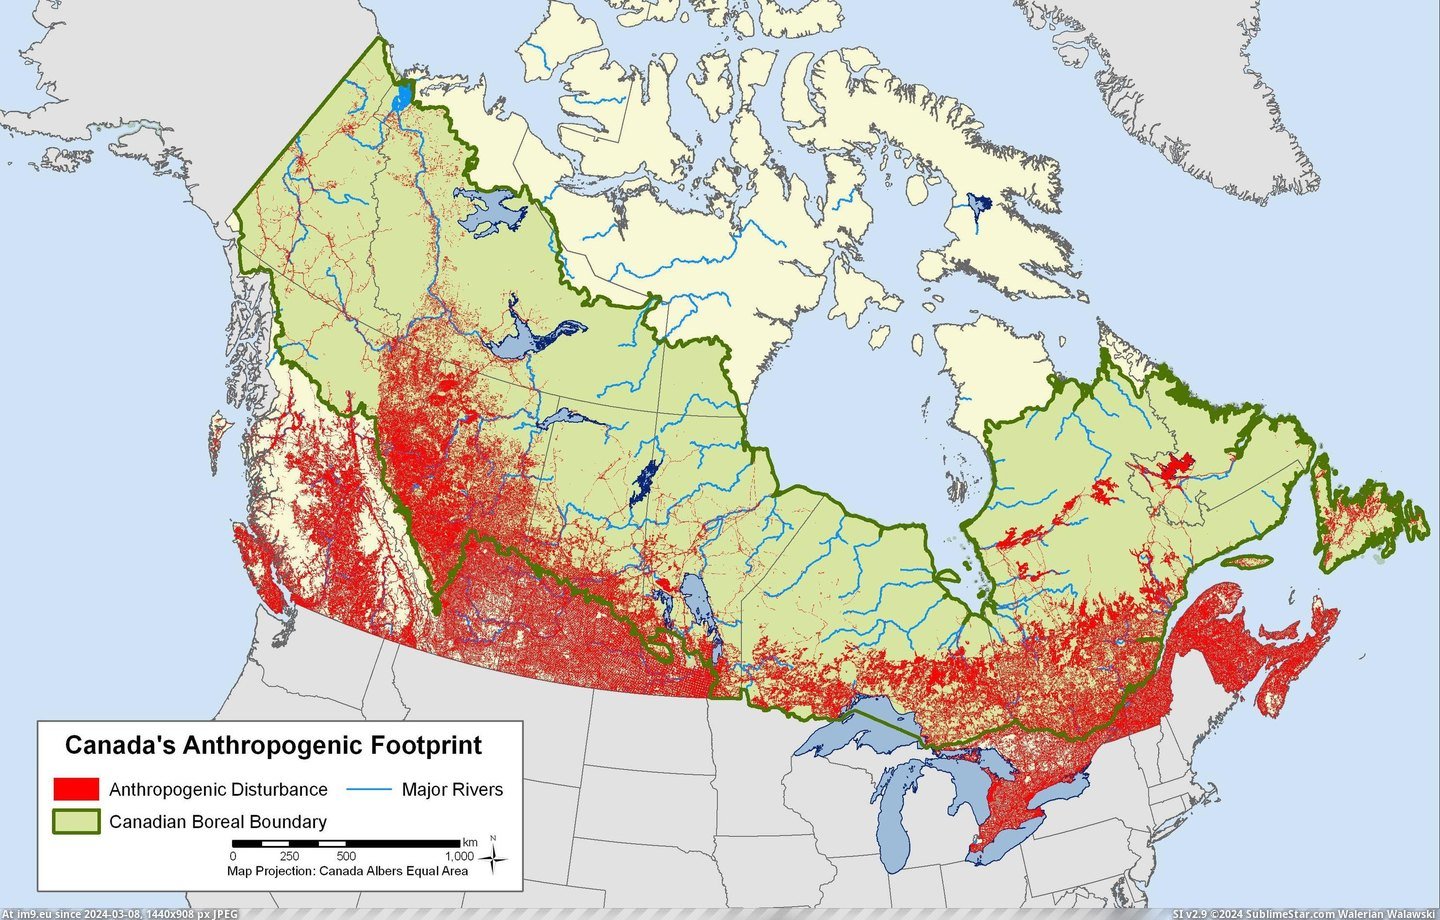 #Canada #Footprint #Roads [Mapporn] Canada's Anthropogenic Footprint - everything from roads to reservoirs [2966x1883] Pic. (Image of album My r/MAPS favs))